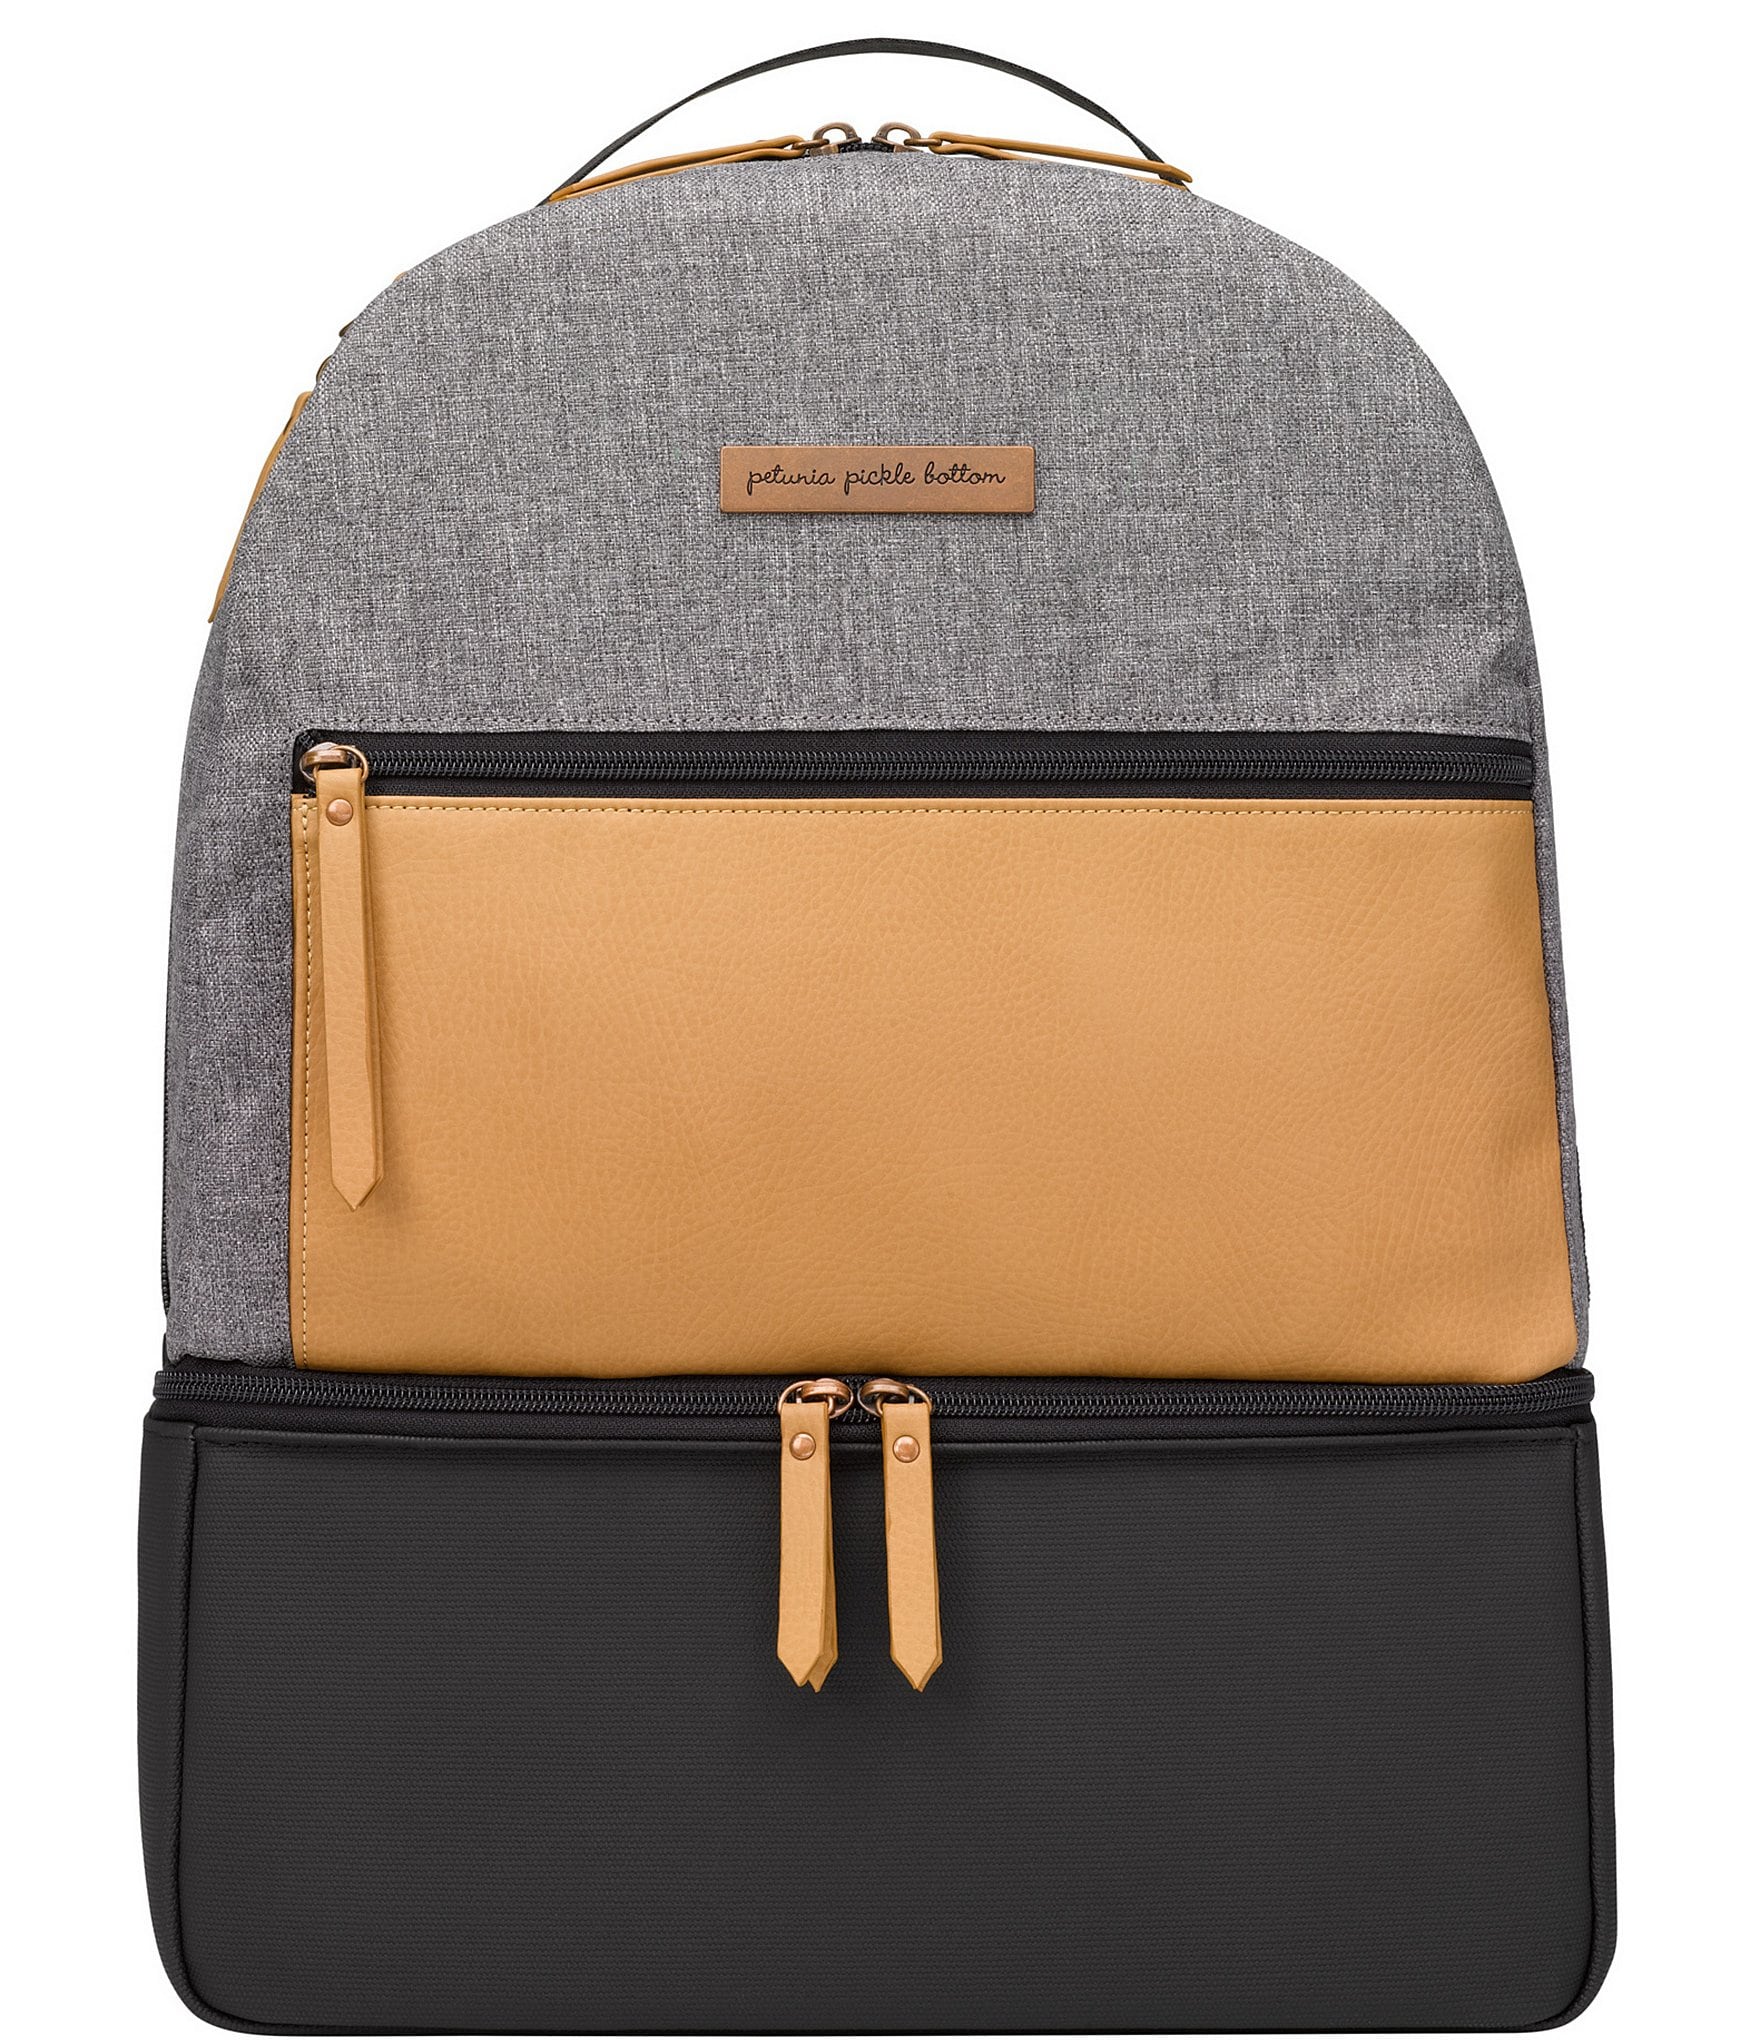 Petunia Pickle Bottom Axis Backpack in Camel/Graphite